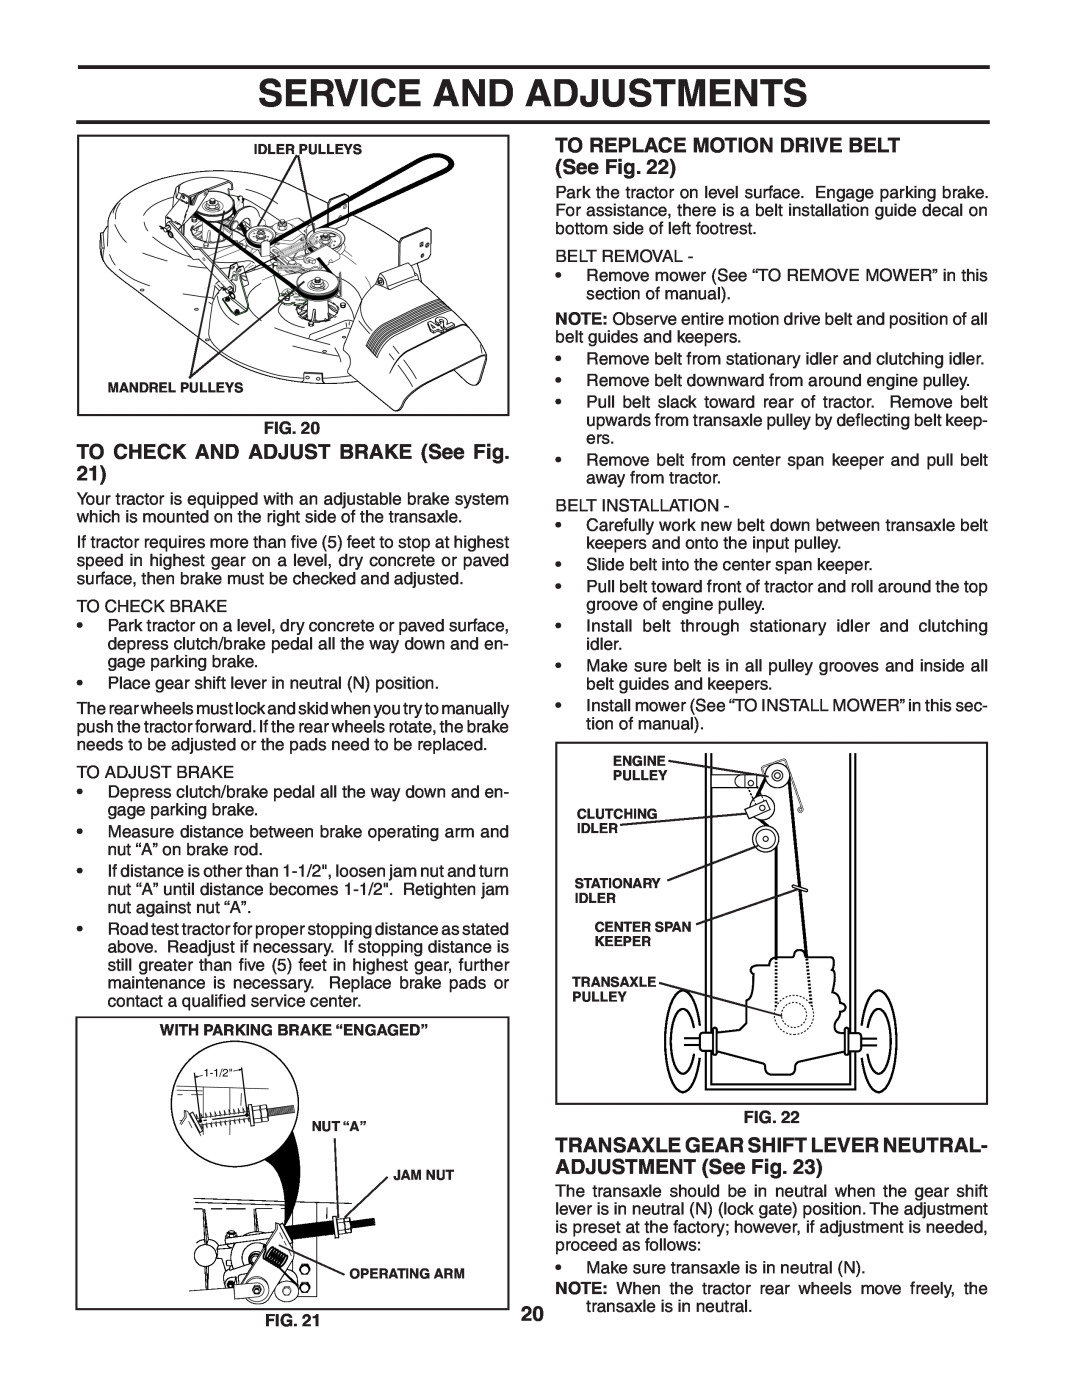 Poulan PO1742STB manual TO CHECK AND ADJUST BRAKE See Fig, TO REPLACE MOTION DRIVE BELT See Fig, Service And Adjustments 